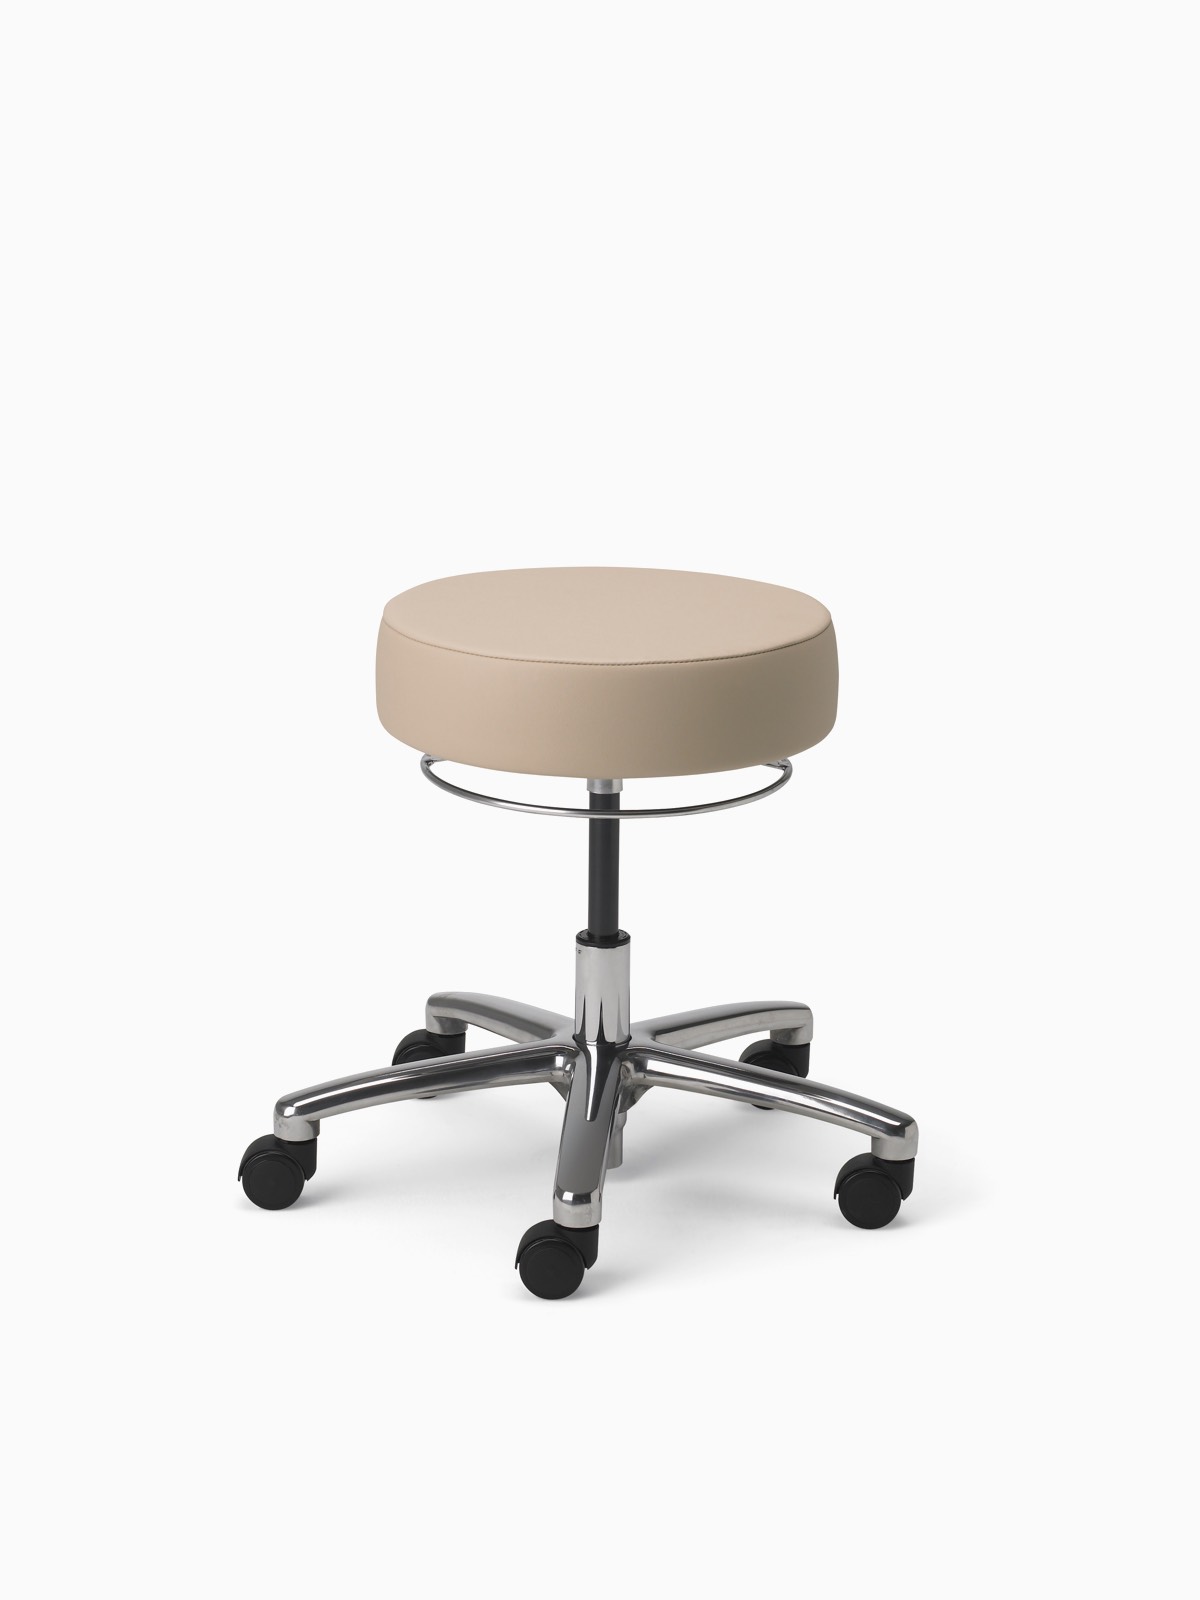 A Physician Stool in tan fabric with aluminum base and polyurethane casters.